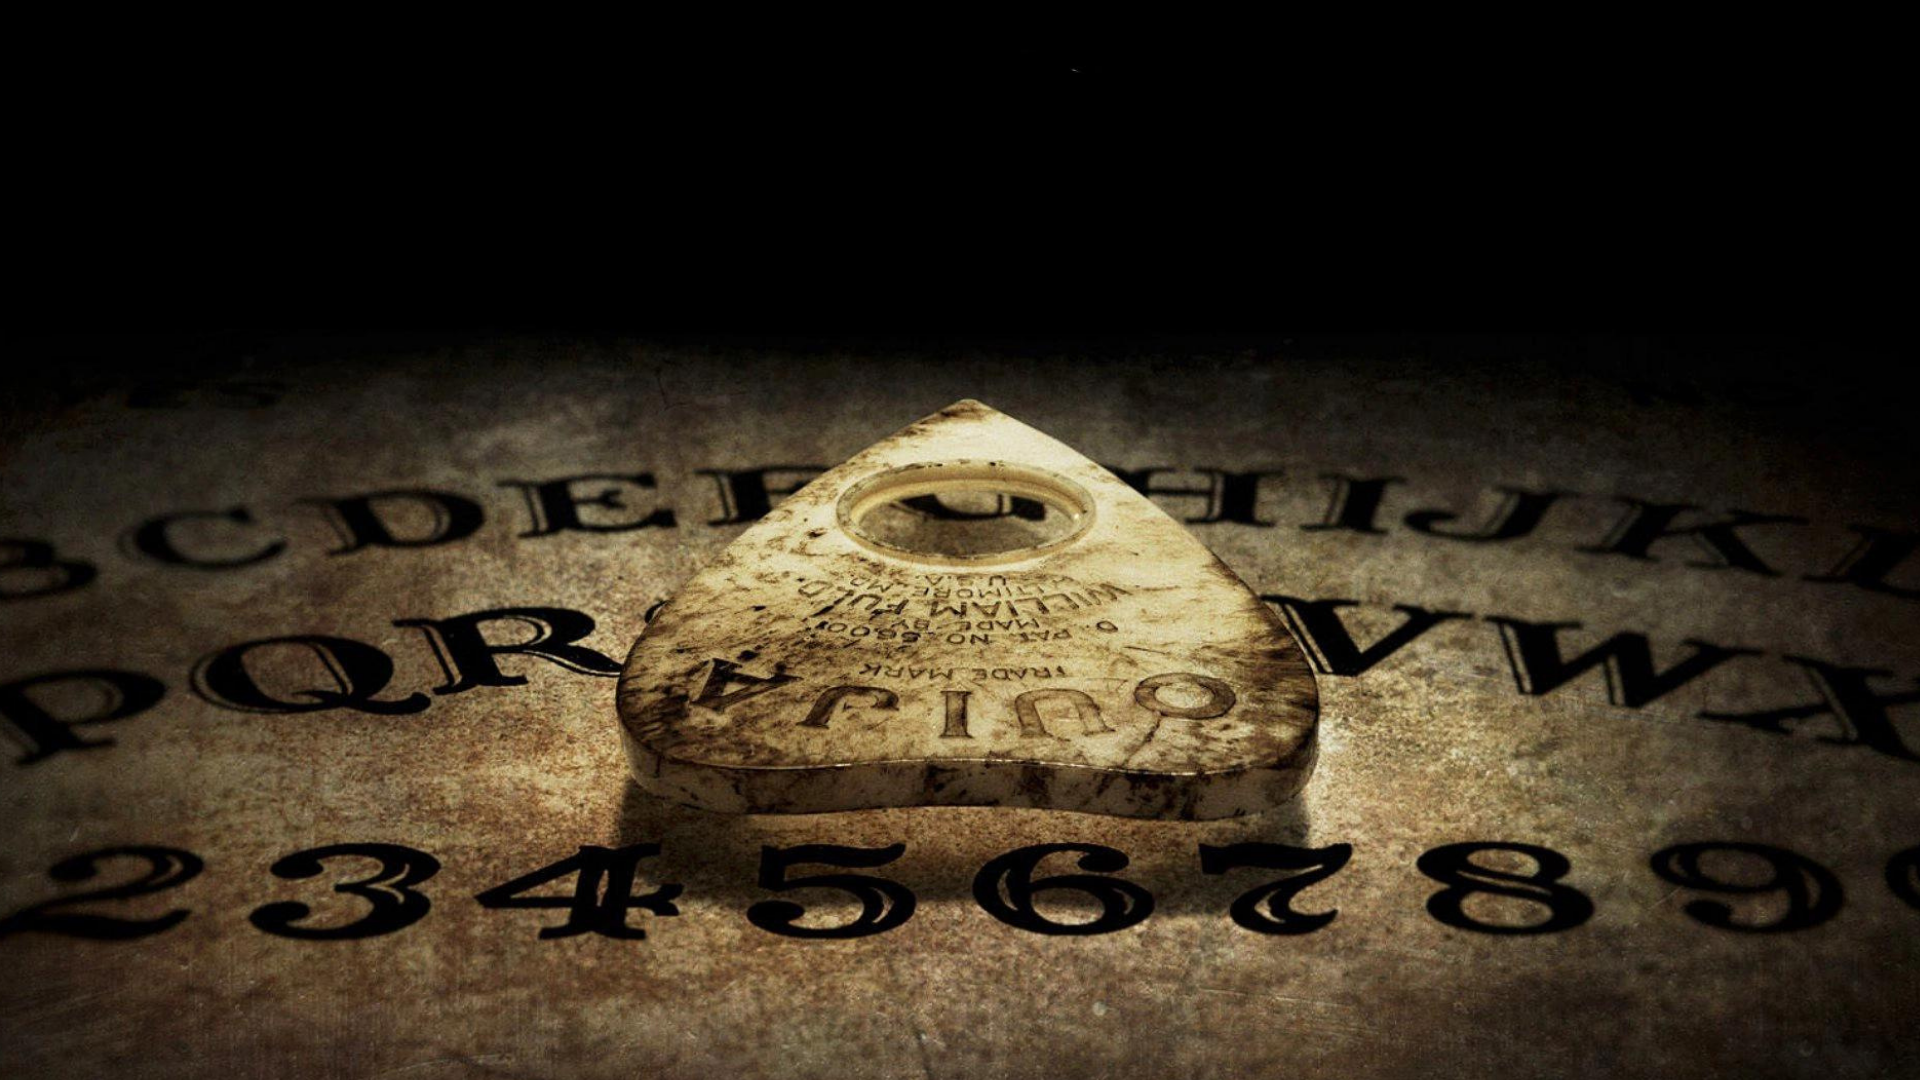 Ouija board with written letters and numbers